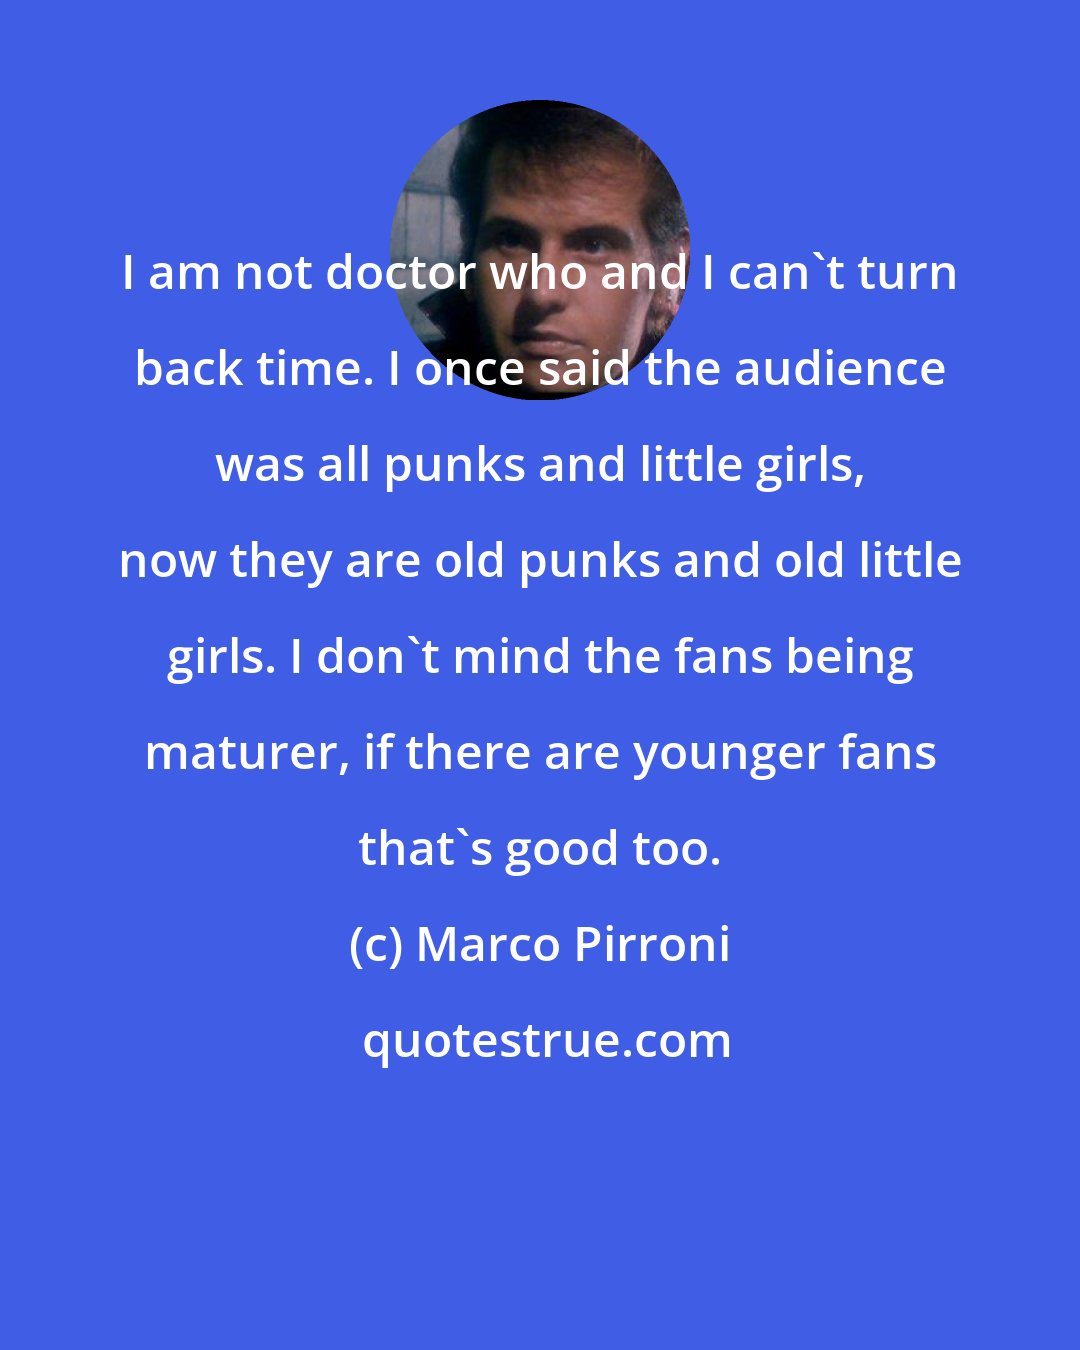 Marco Pirroni: I am not doctor who and I can't turn back time. I once said the audience was all punks and little girls, now they are old punks and old little girls. I don't mind the fans being maturer, if there are younger fans that's good too.